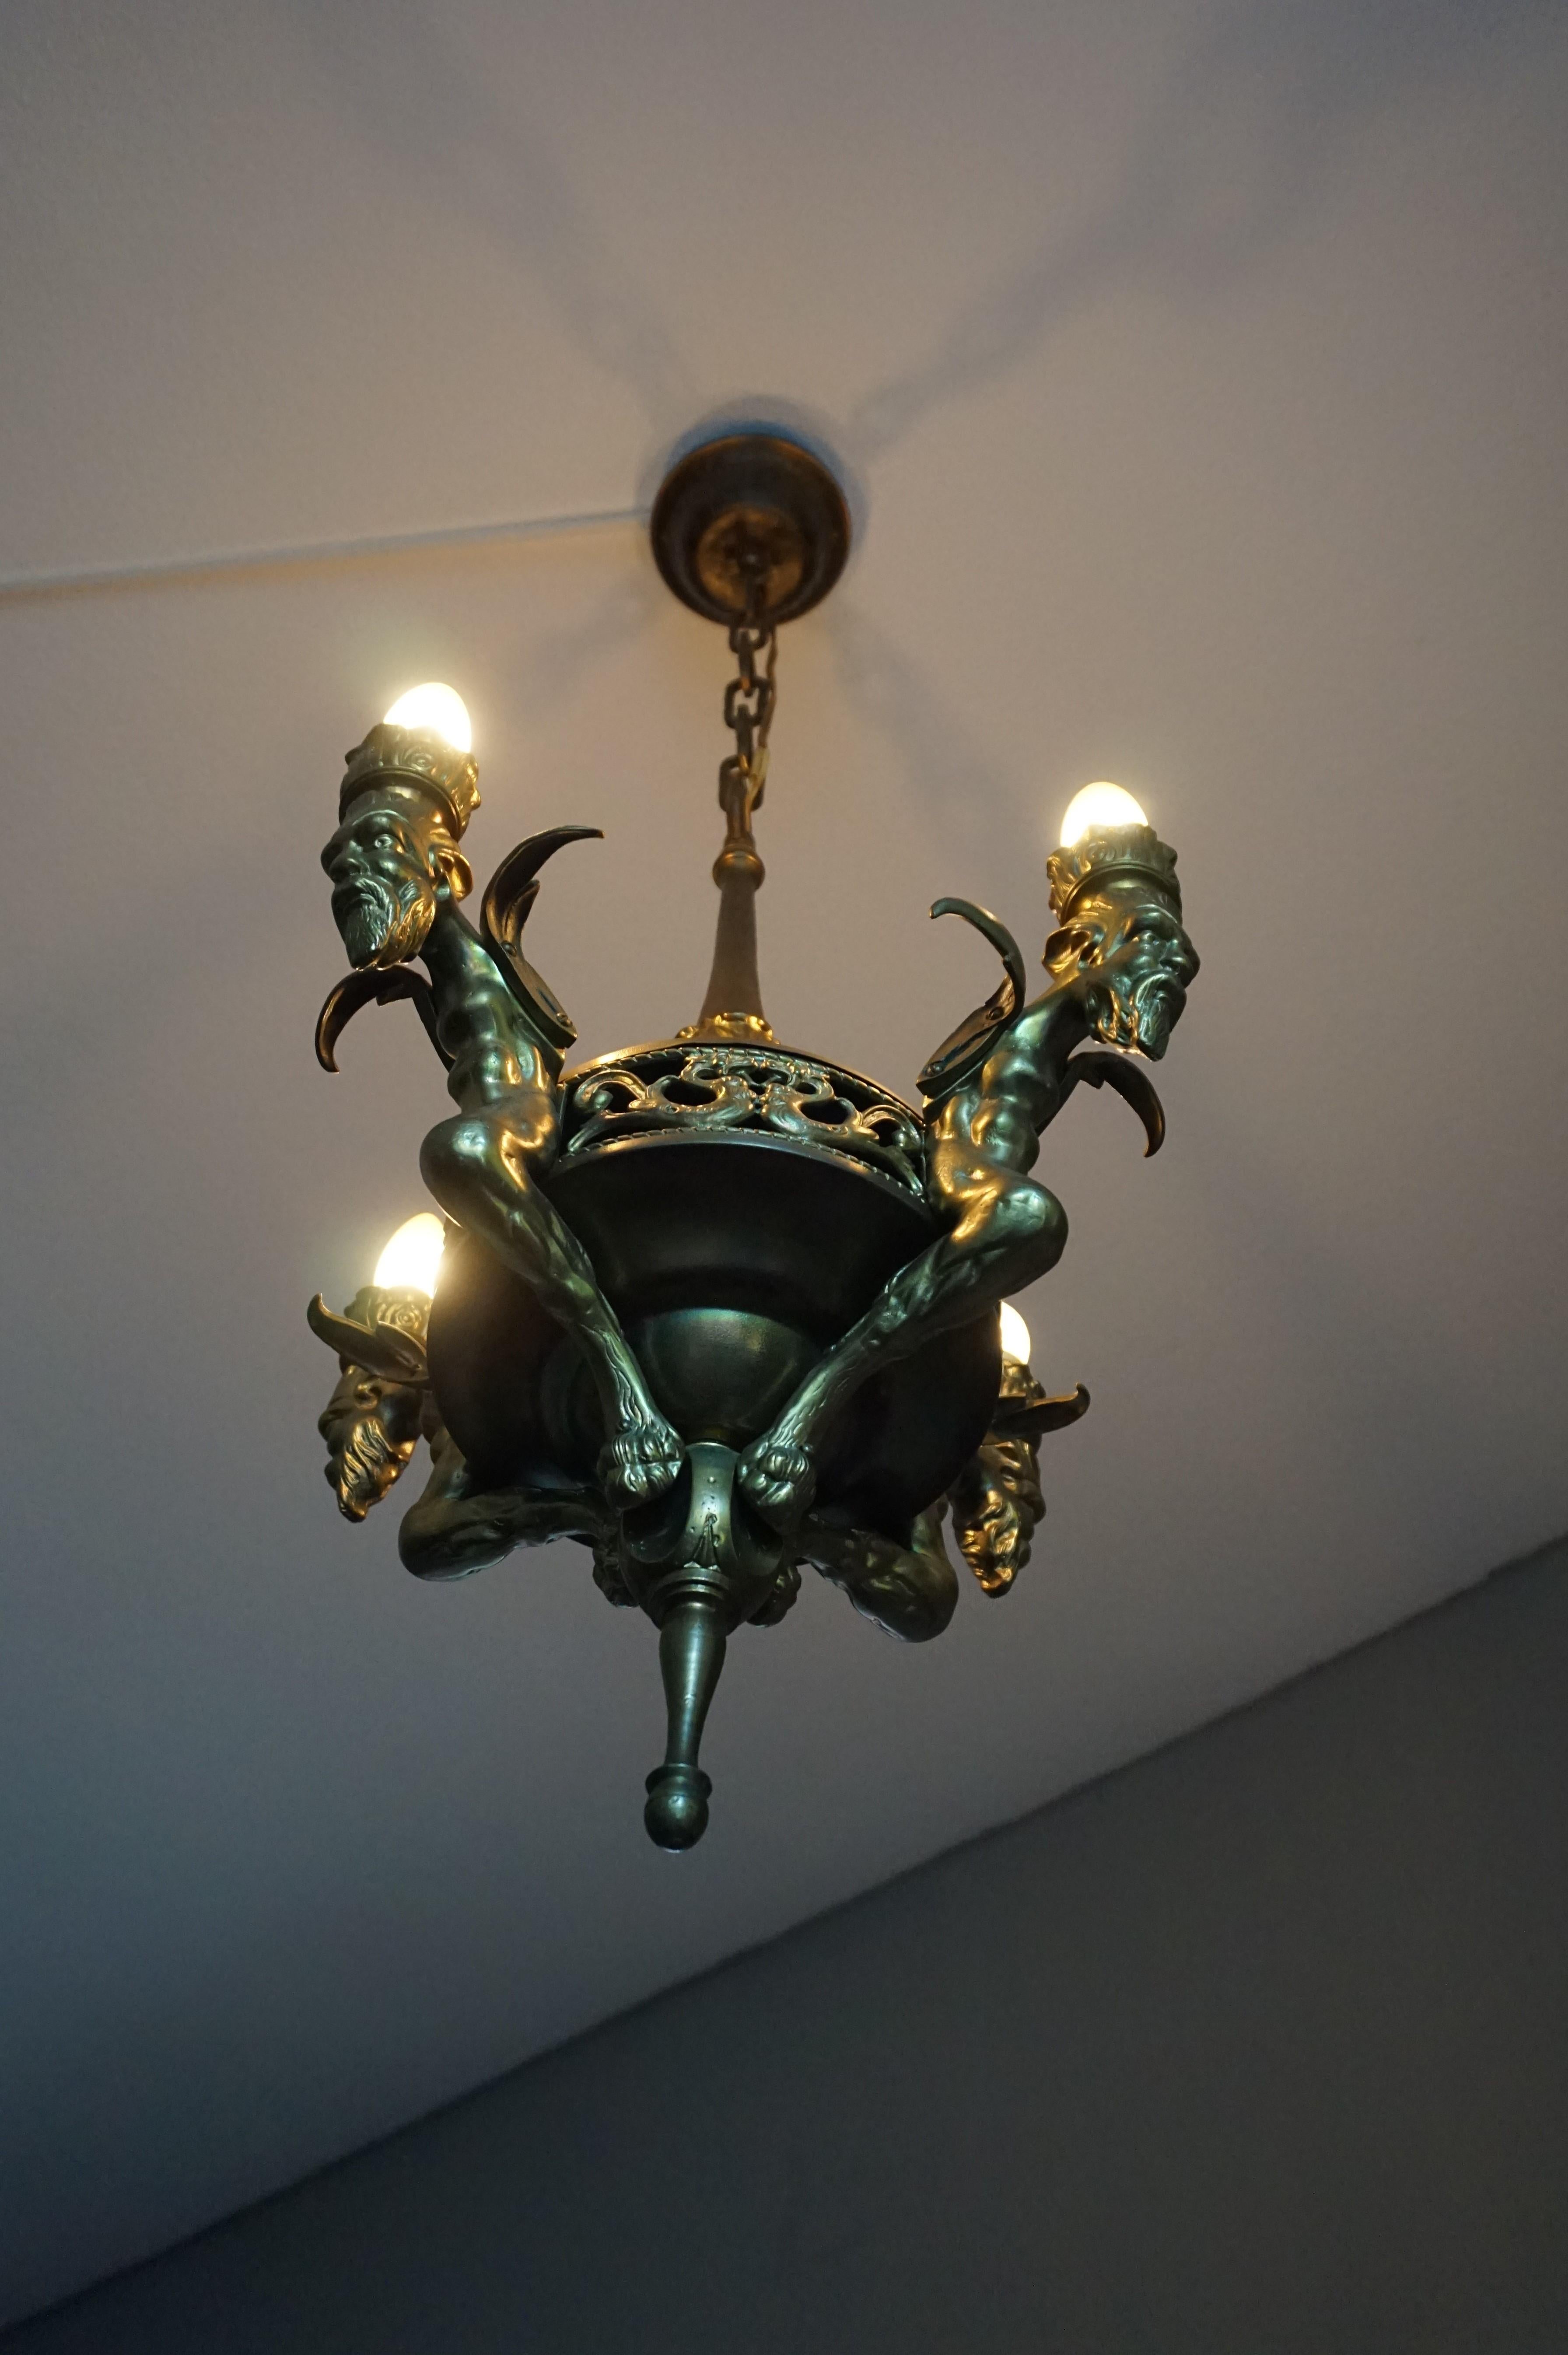 Unique, early 1900s Gothic Revival light fixture.

In architecture, a chimera or grotesque is a fantastic or mythical figure used for decorative purposes, but in the 12th and 13th century (when most people were illiterate) they were first used for